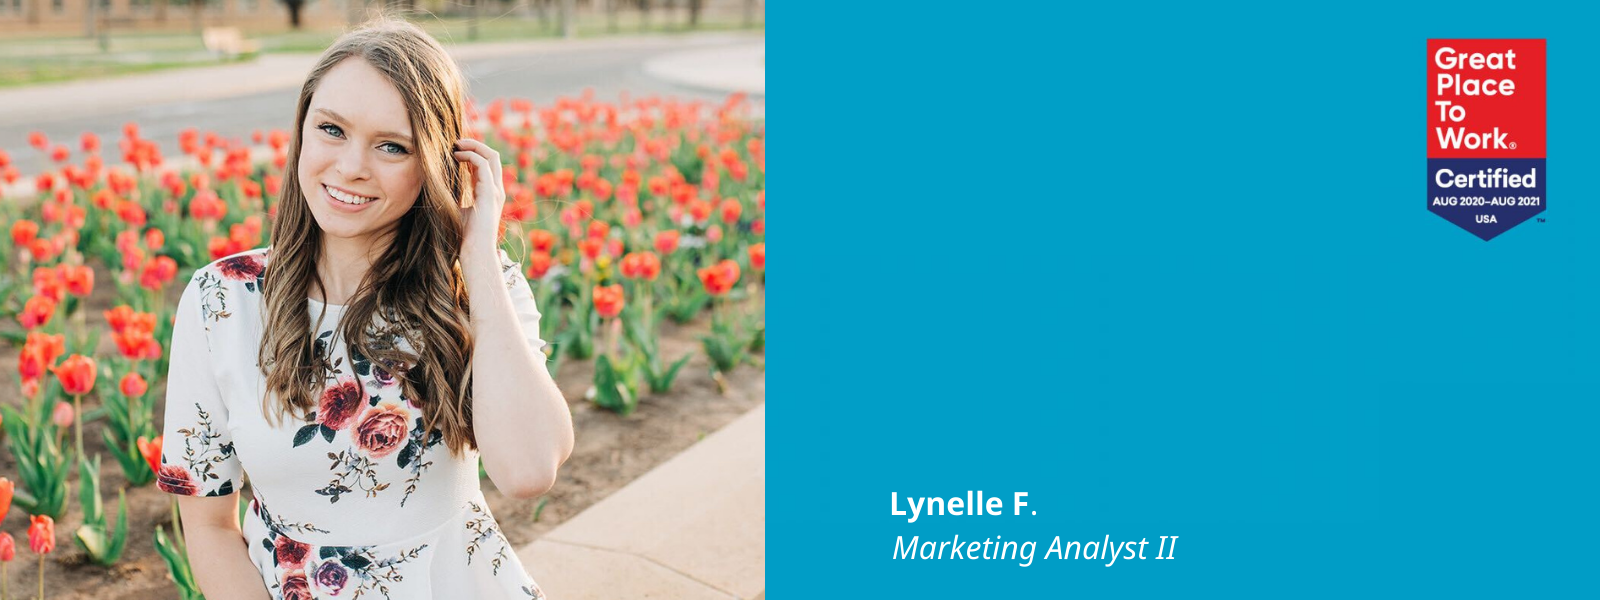 Photo of Lynelle F. next to a blue box with a Great Place To Work Certified logo in it and text: Lynelle F., Marketing Analyst II